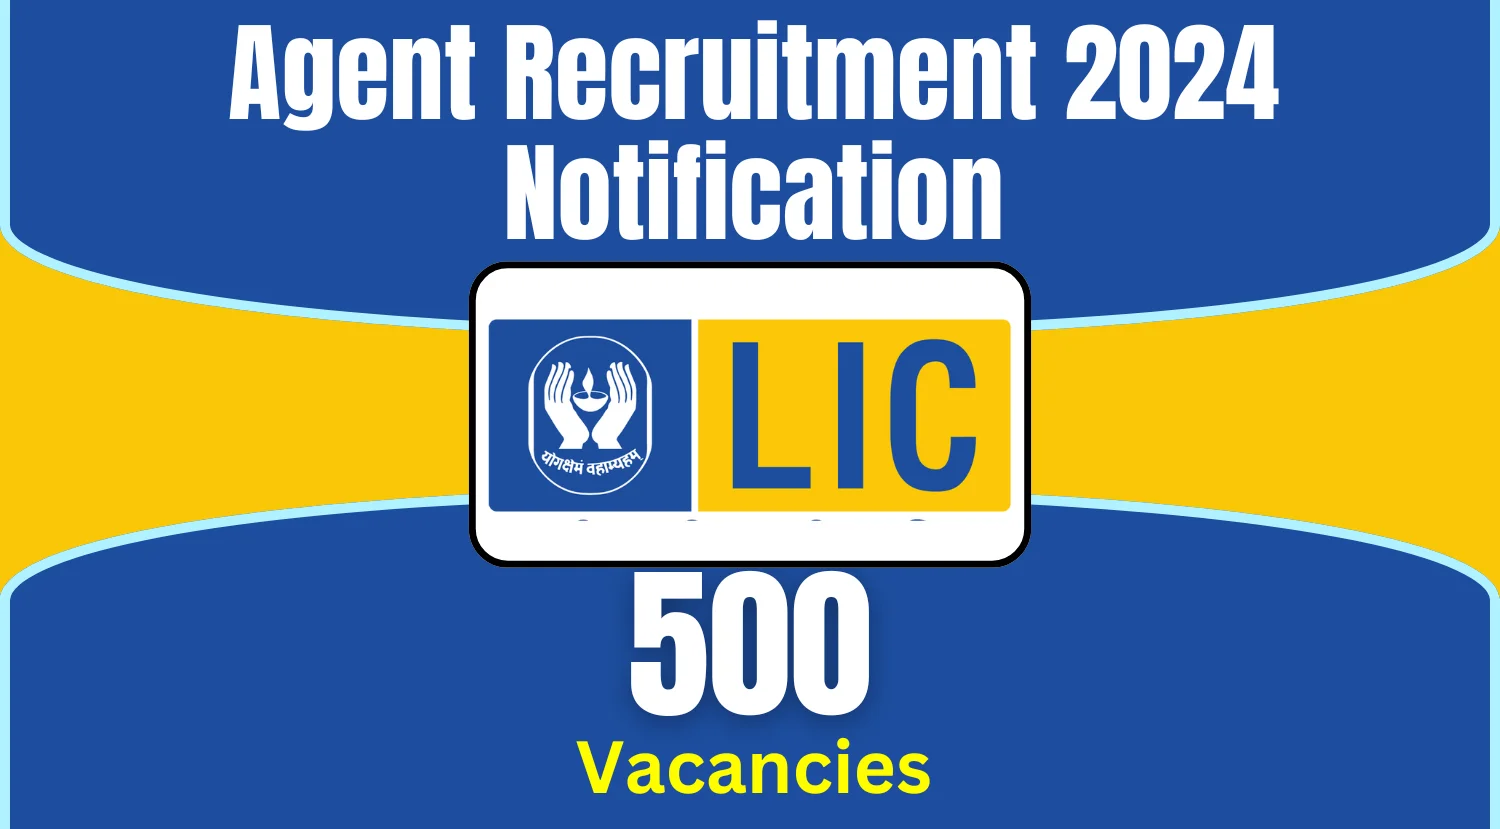 LIC Agent Recruitment 2024 Notification Out for 500 Vacancies, Check Eligibility Details Now